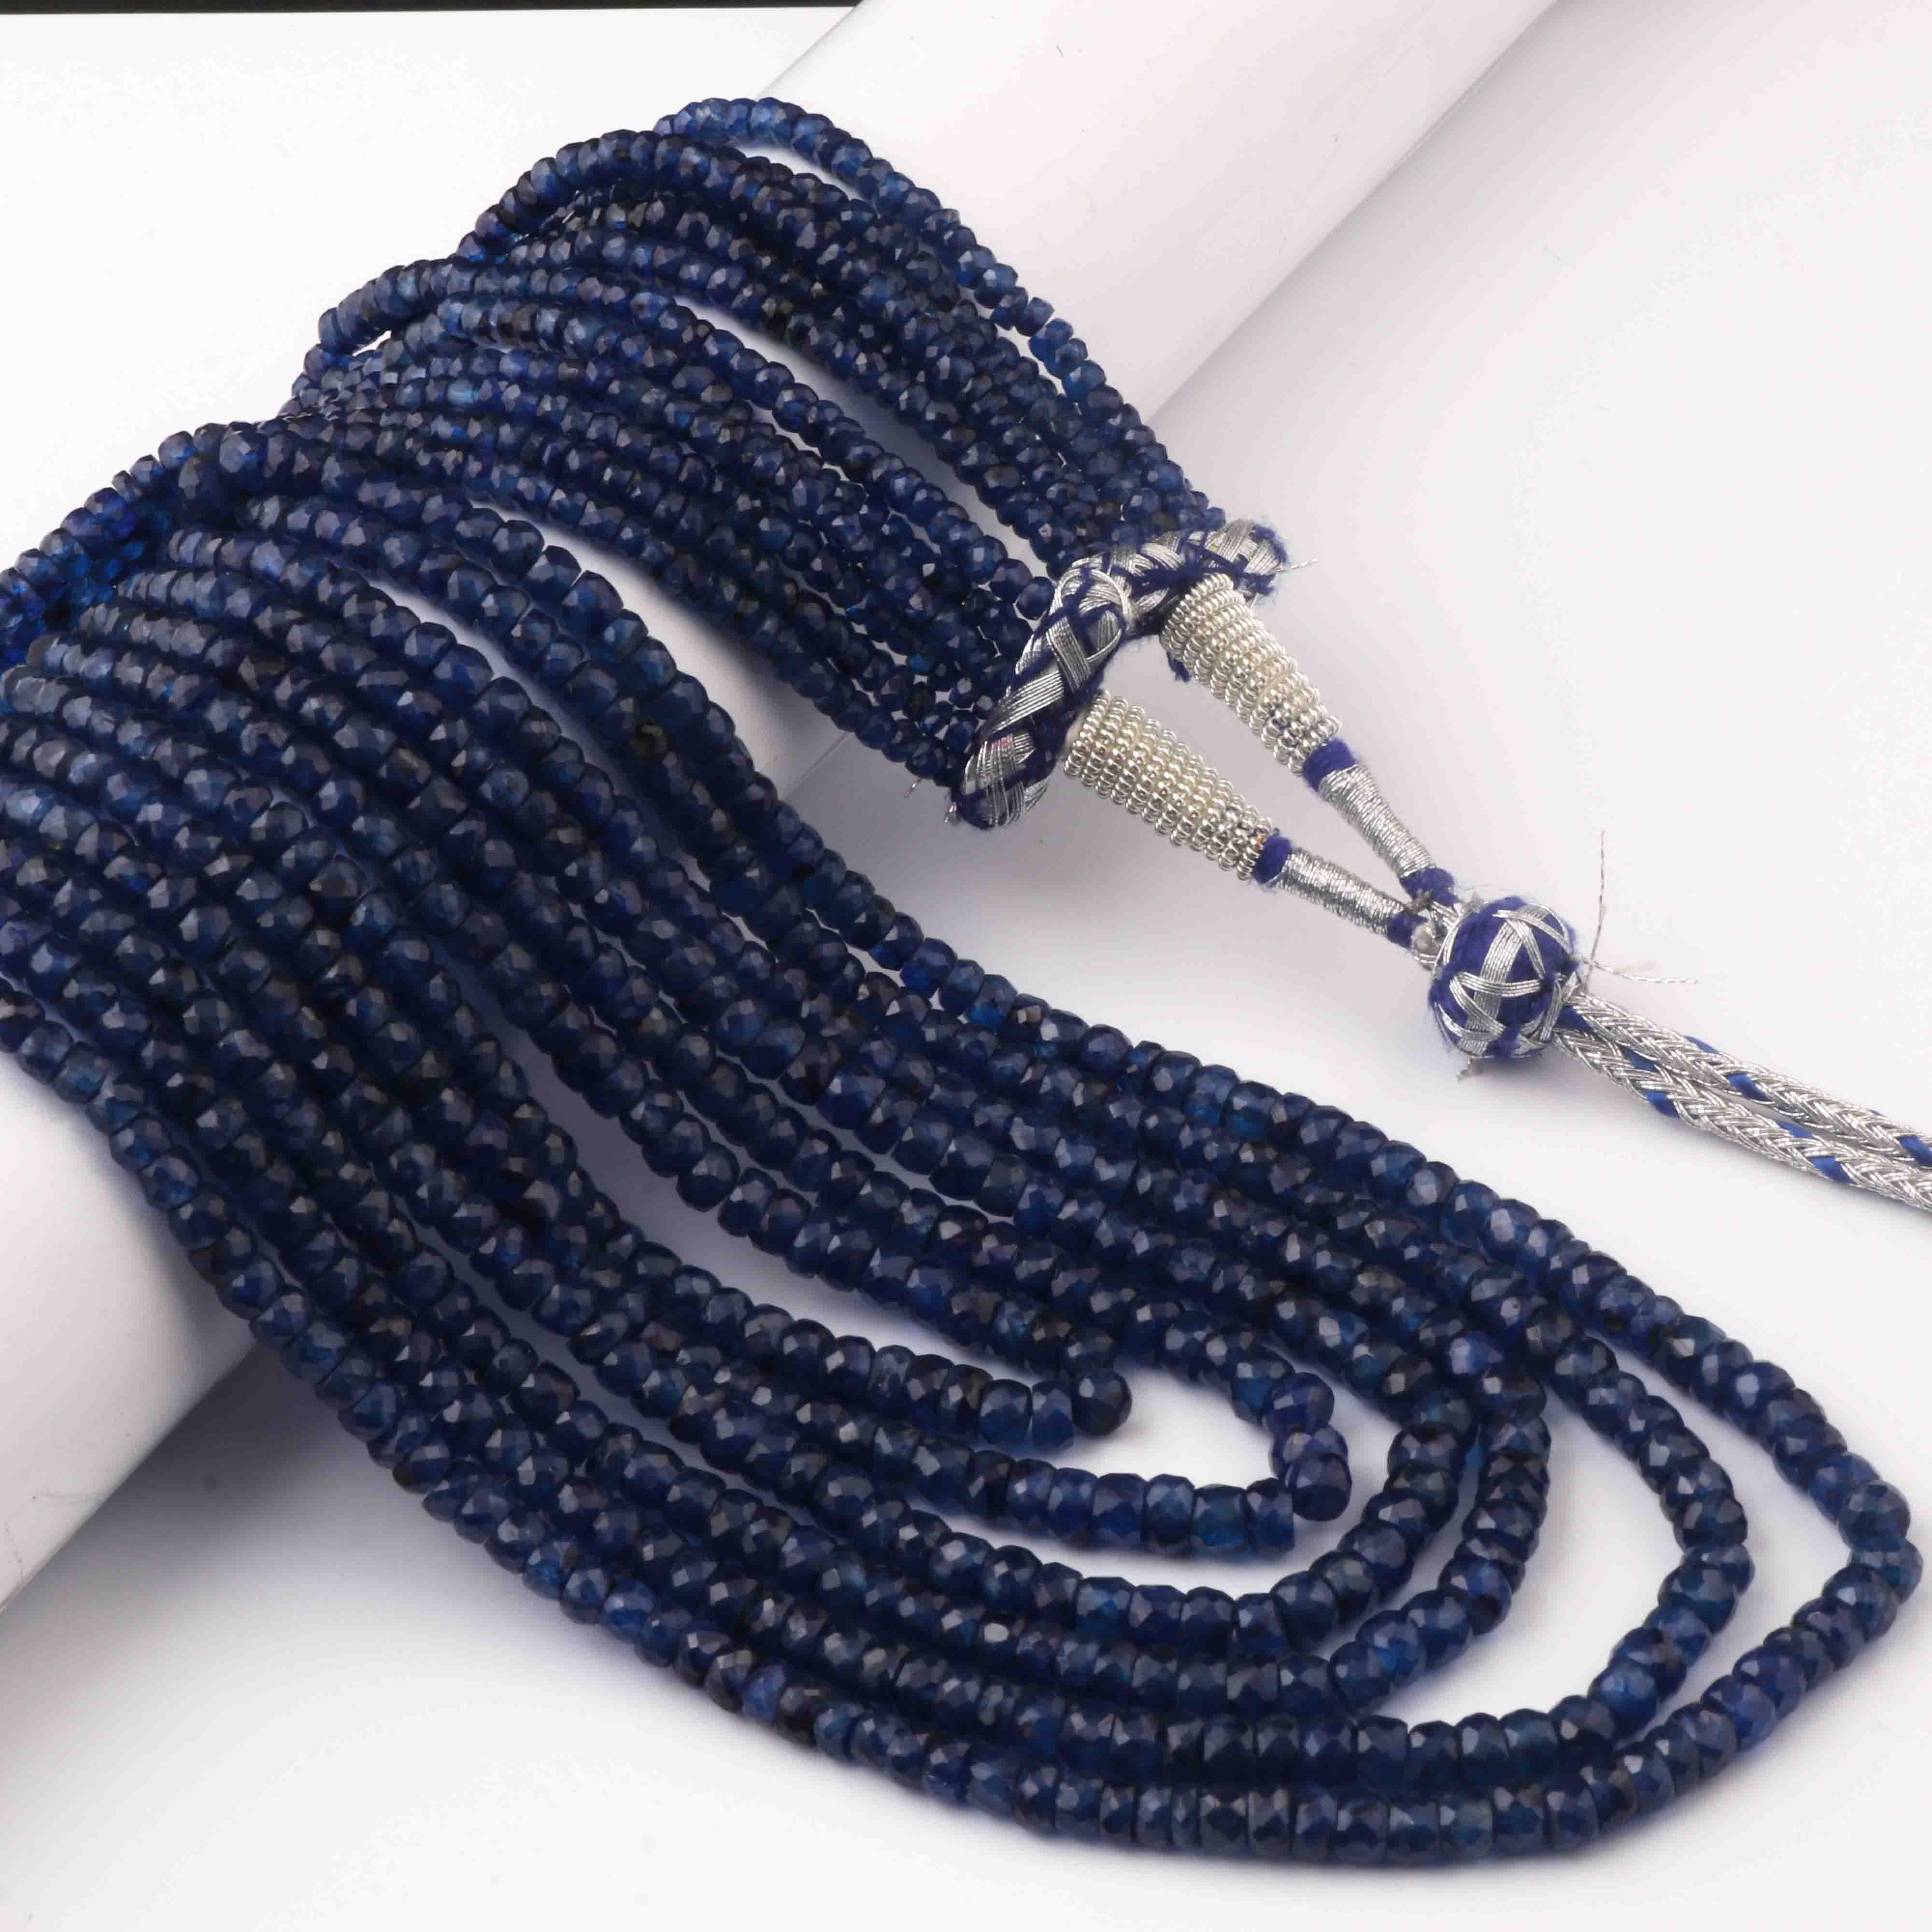 Natural Blue Tanzanite Plain Oval Gemstone Beads Necklace, 1520 Ct at Rs  80/carat in Jaipur